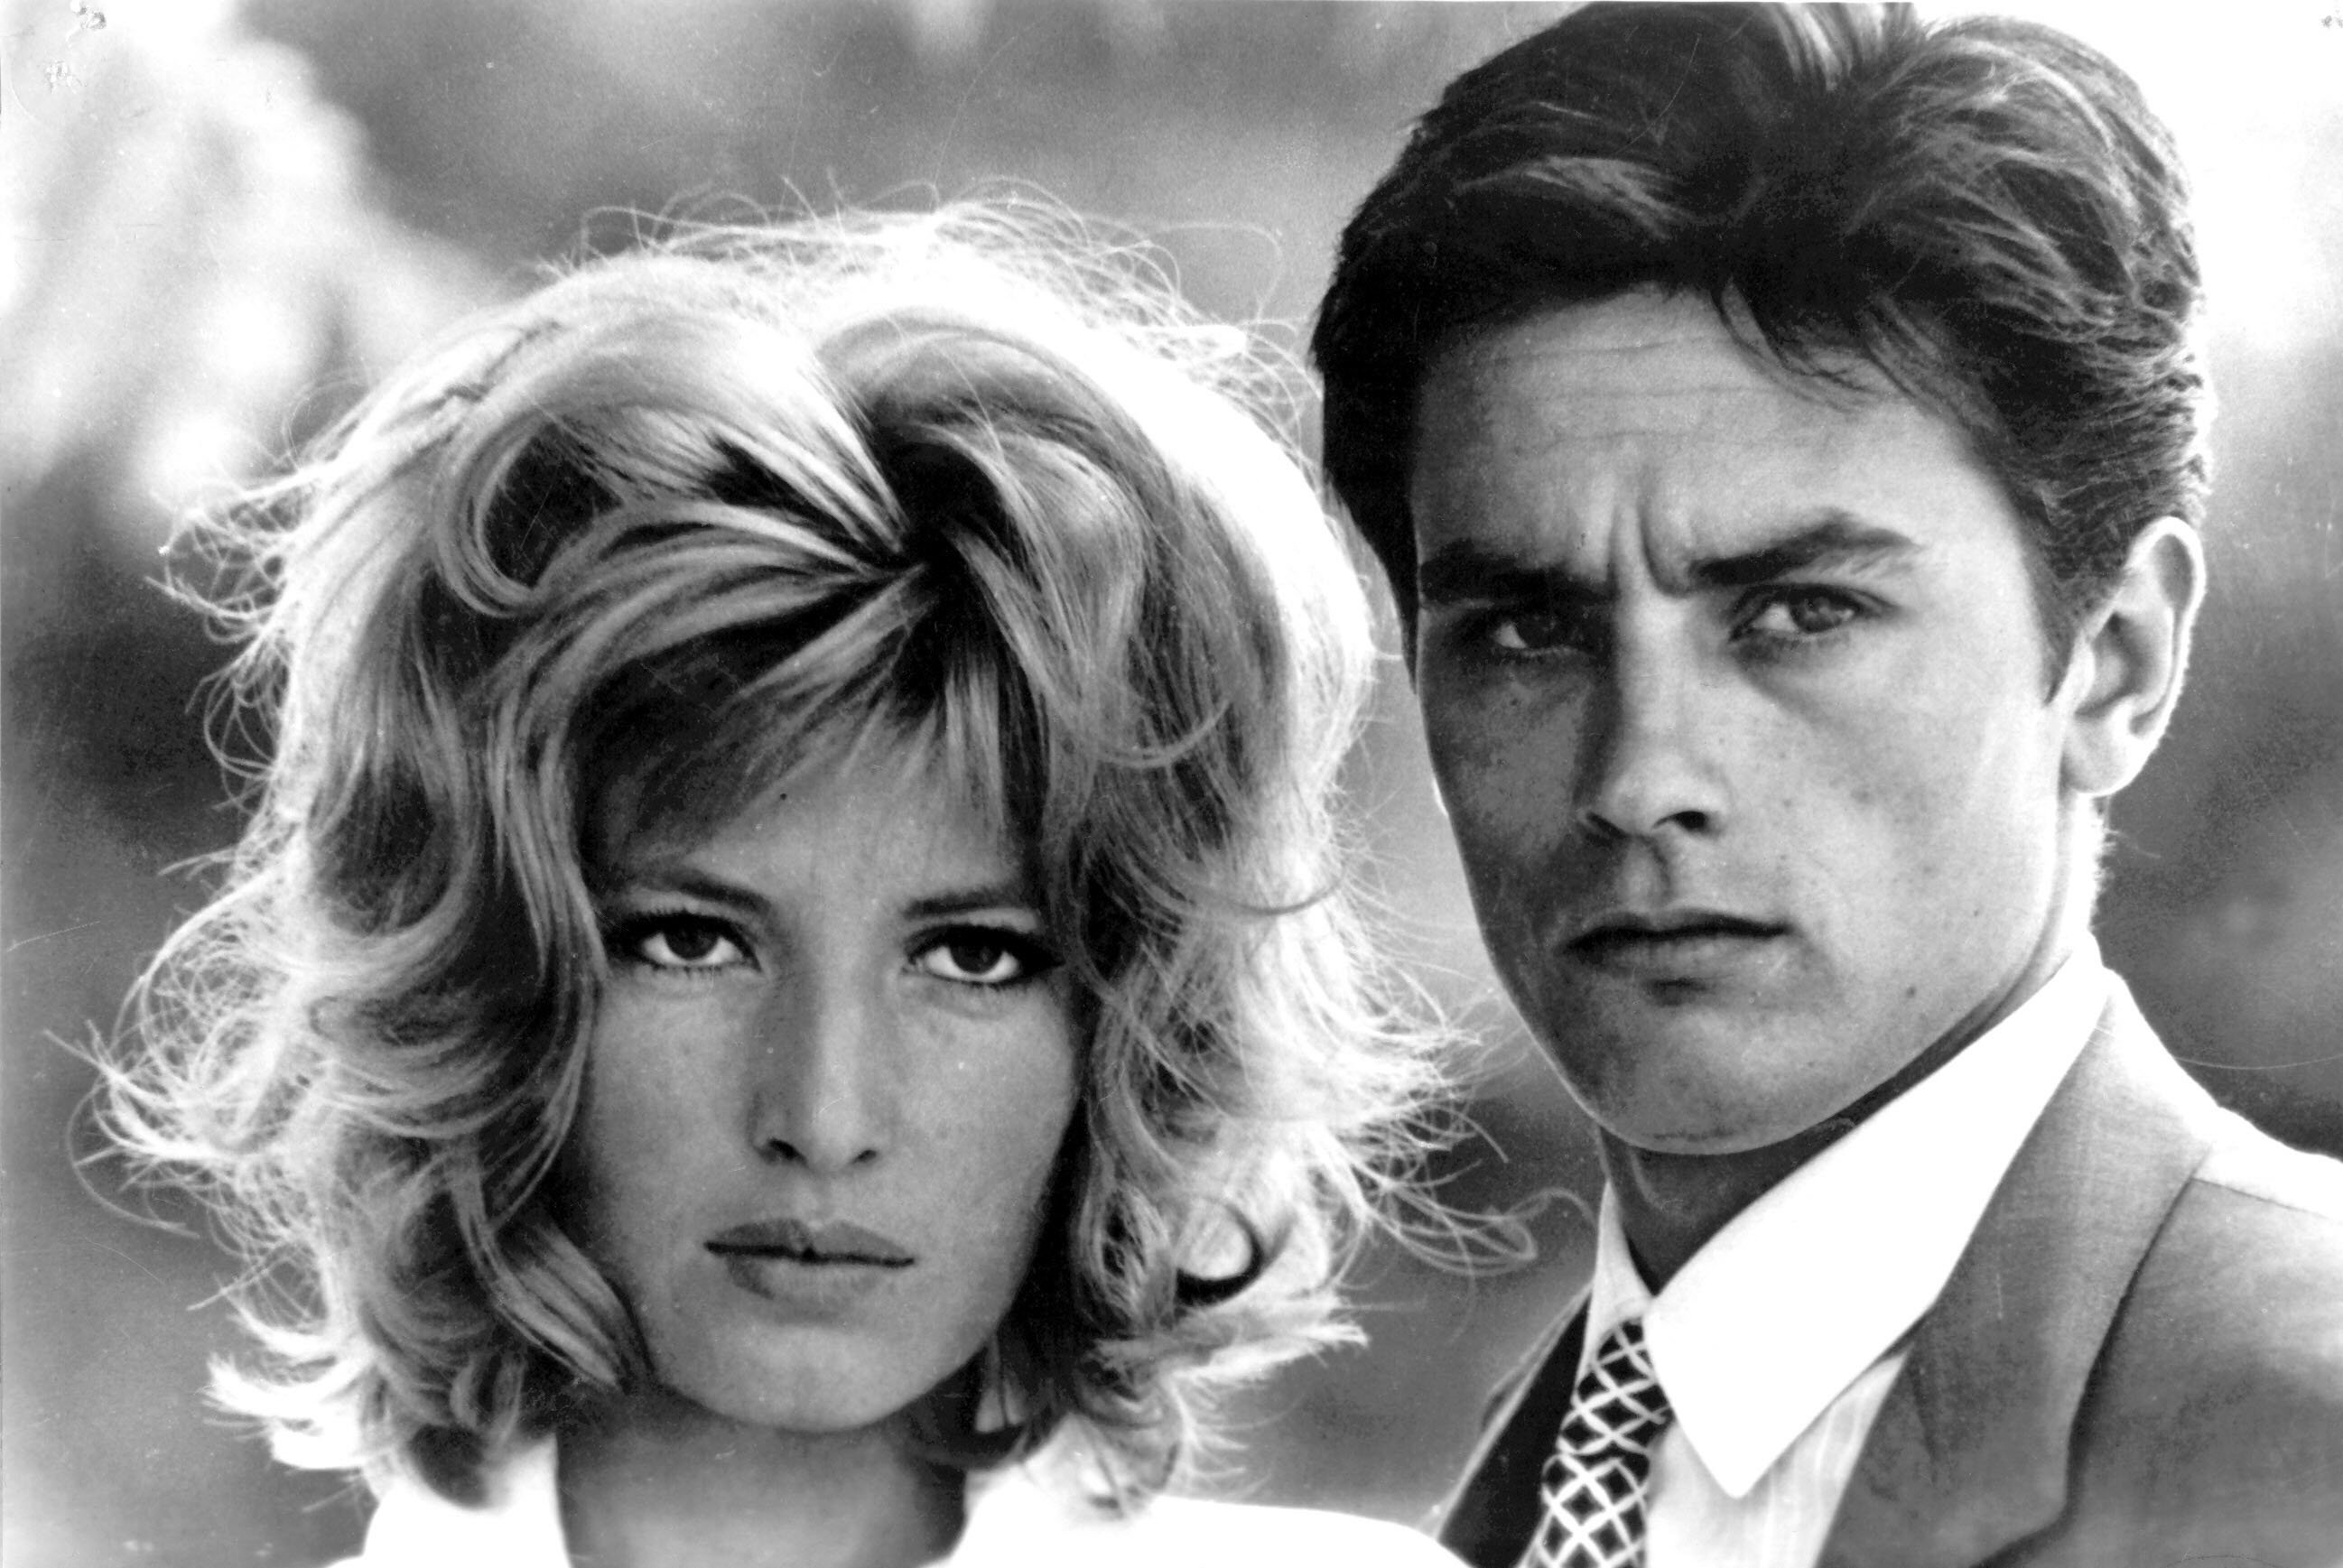 The beguiling beauty of L'Eclisse – The HotCorn